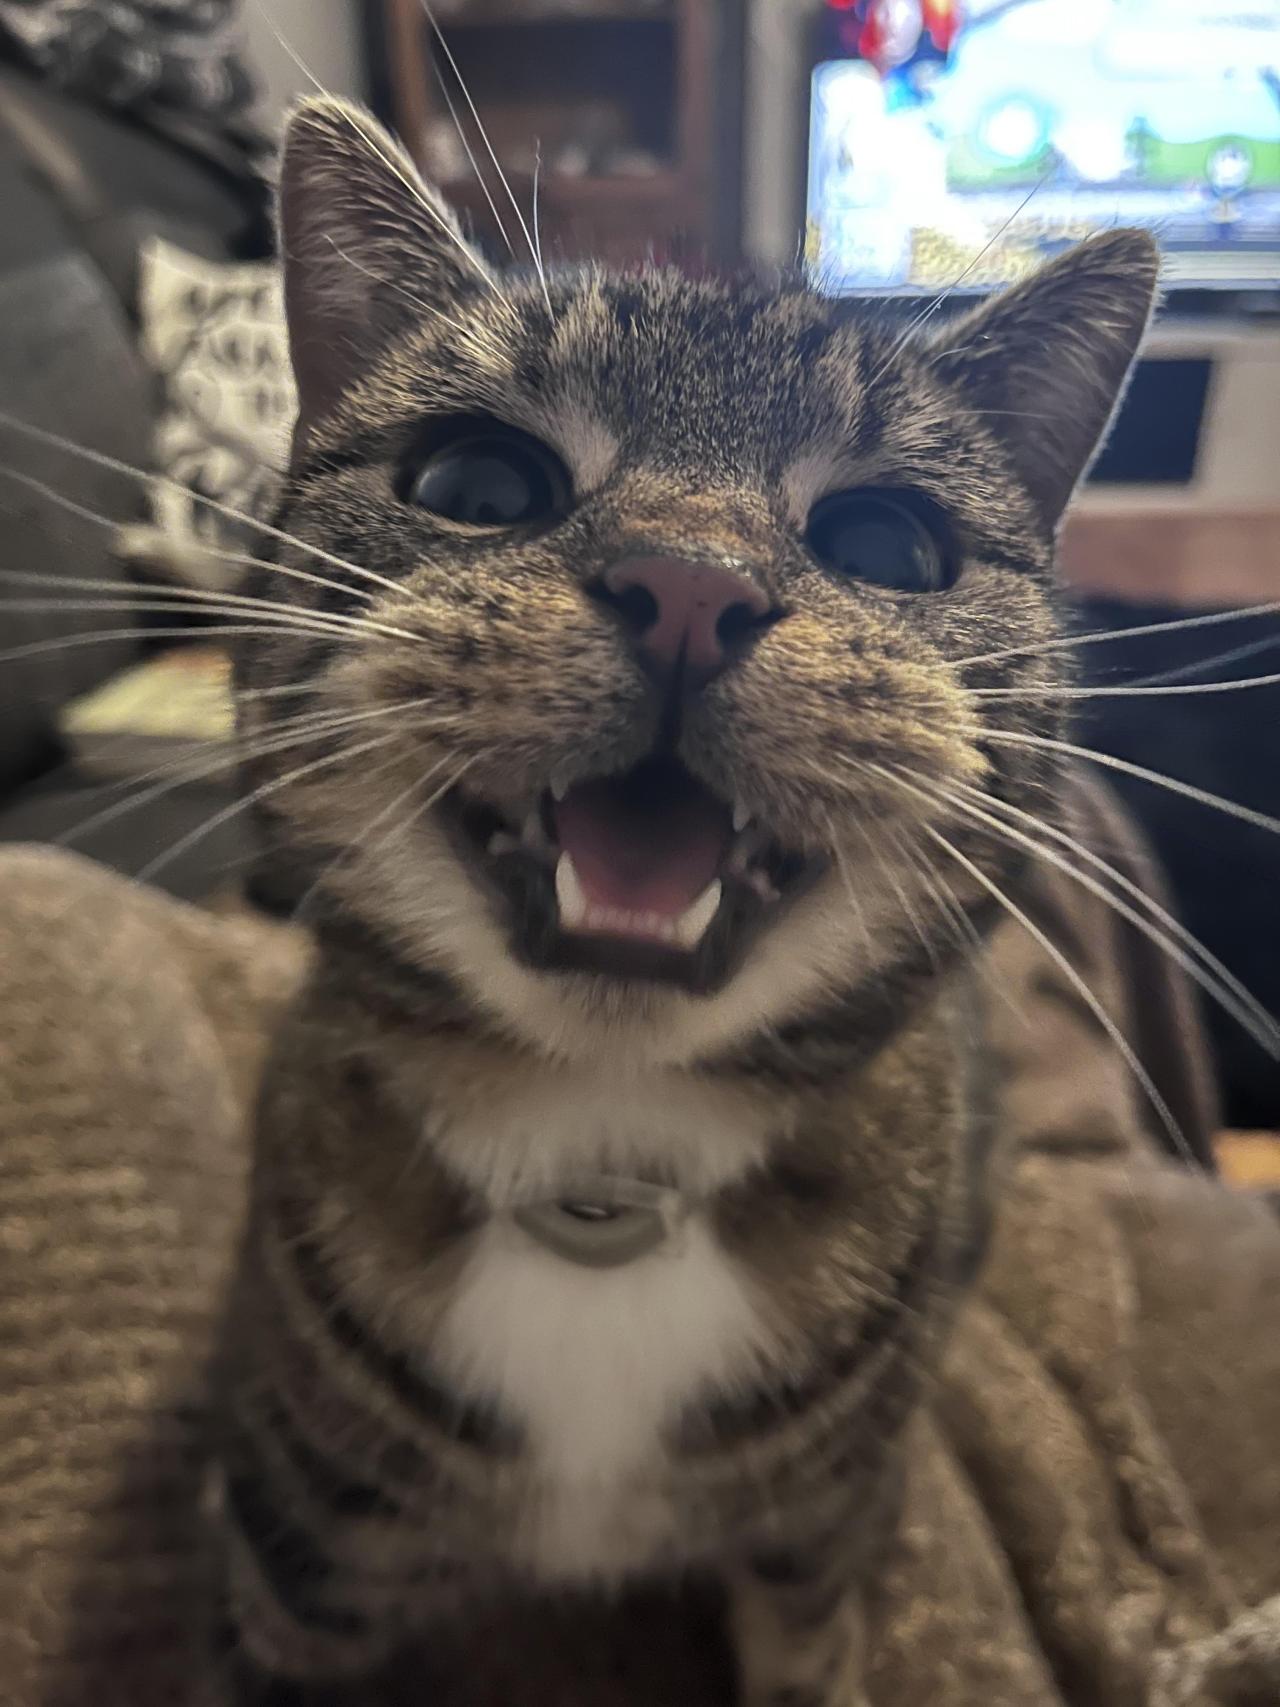 I present to you; the best picture of my kitty. via /r/aww https://ift.tt/3G2peWt #cute#animal#adorable#funny#wholesome#puppy#kitten#kitty#dog#cat#animals#reddit